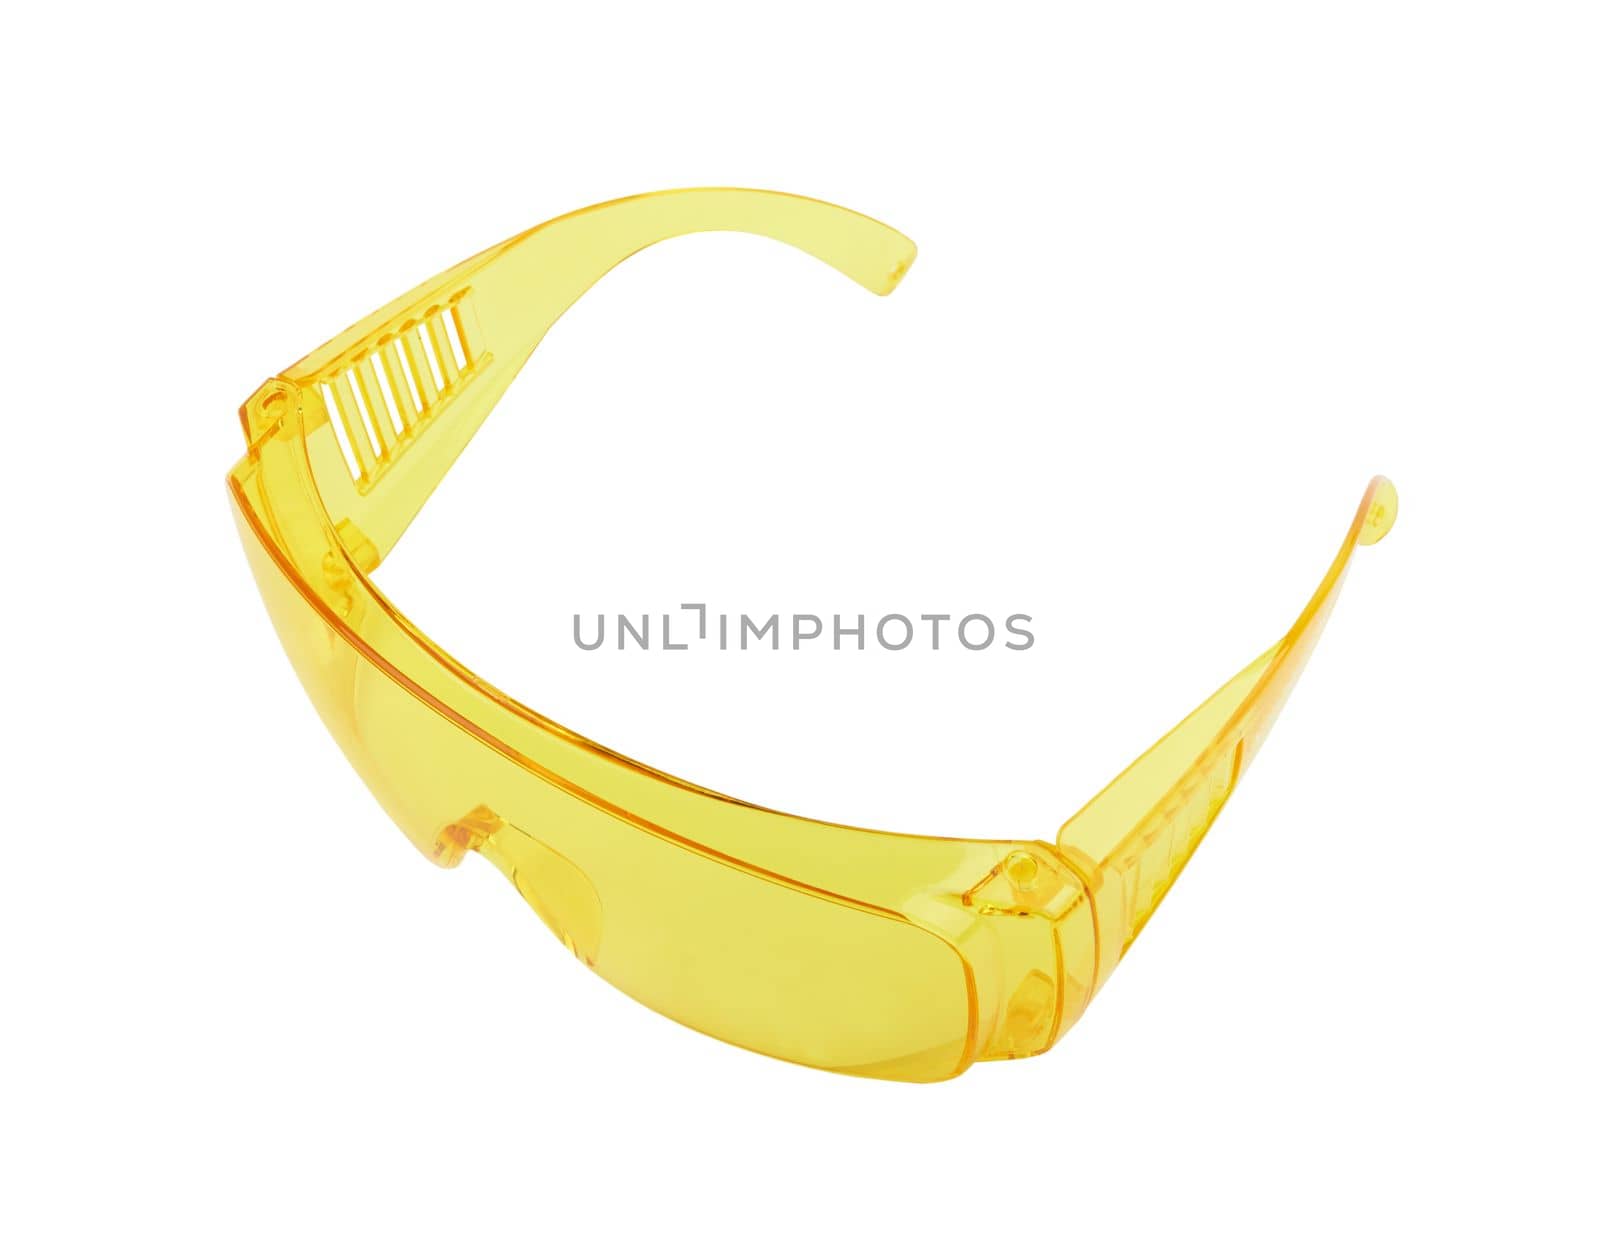 Yellow plastic protective work glasses isolated on a white background